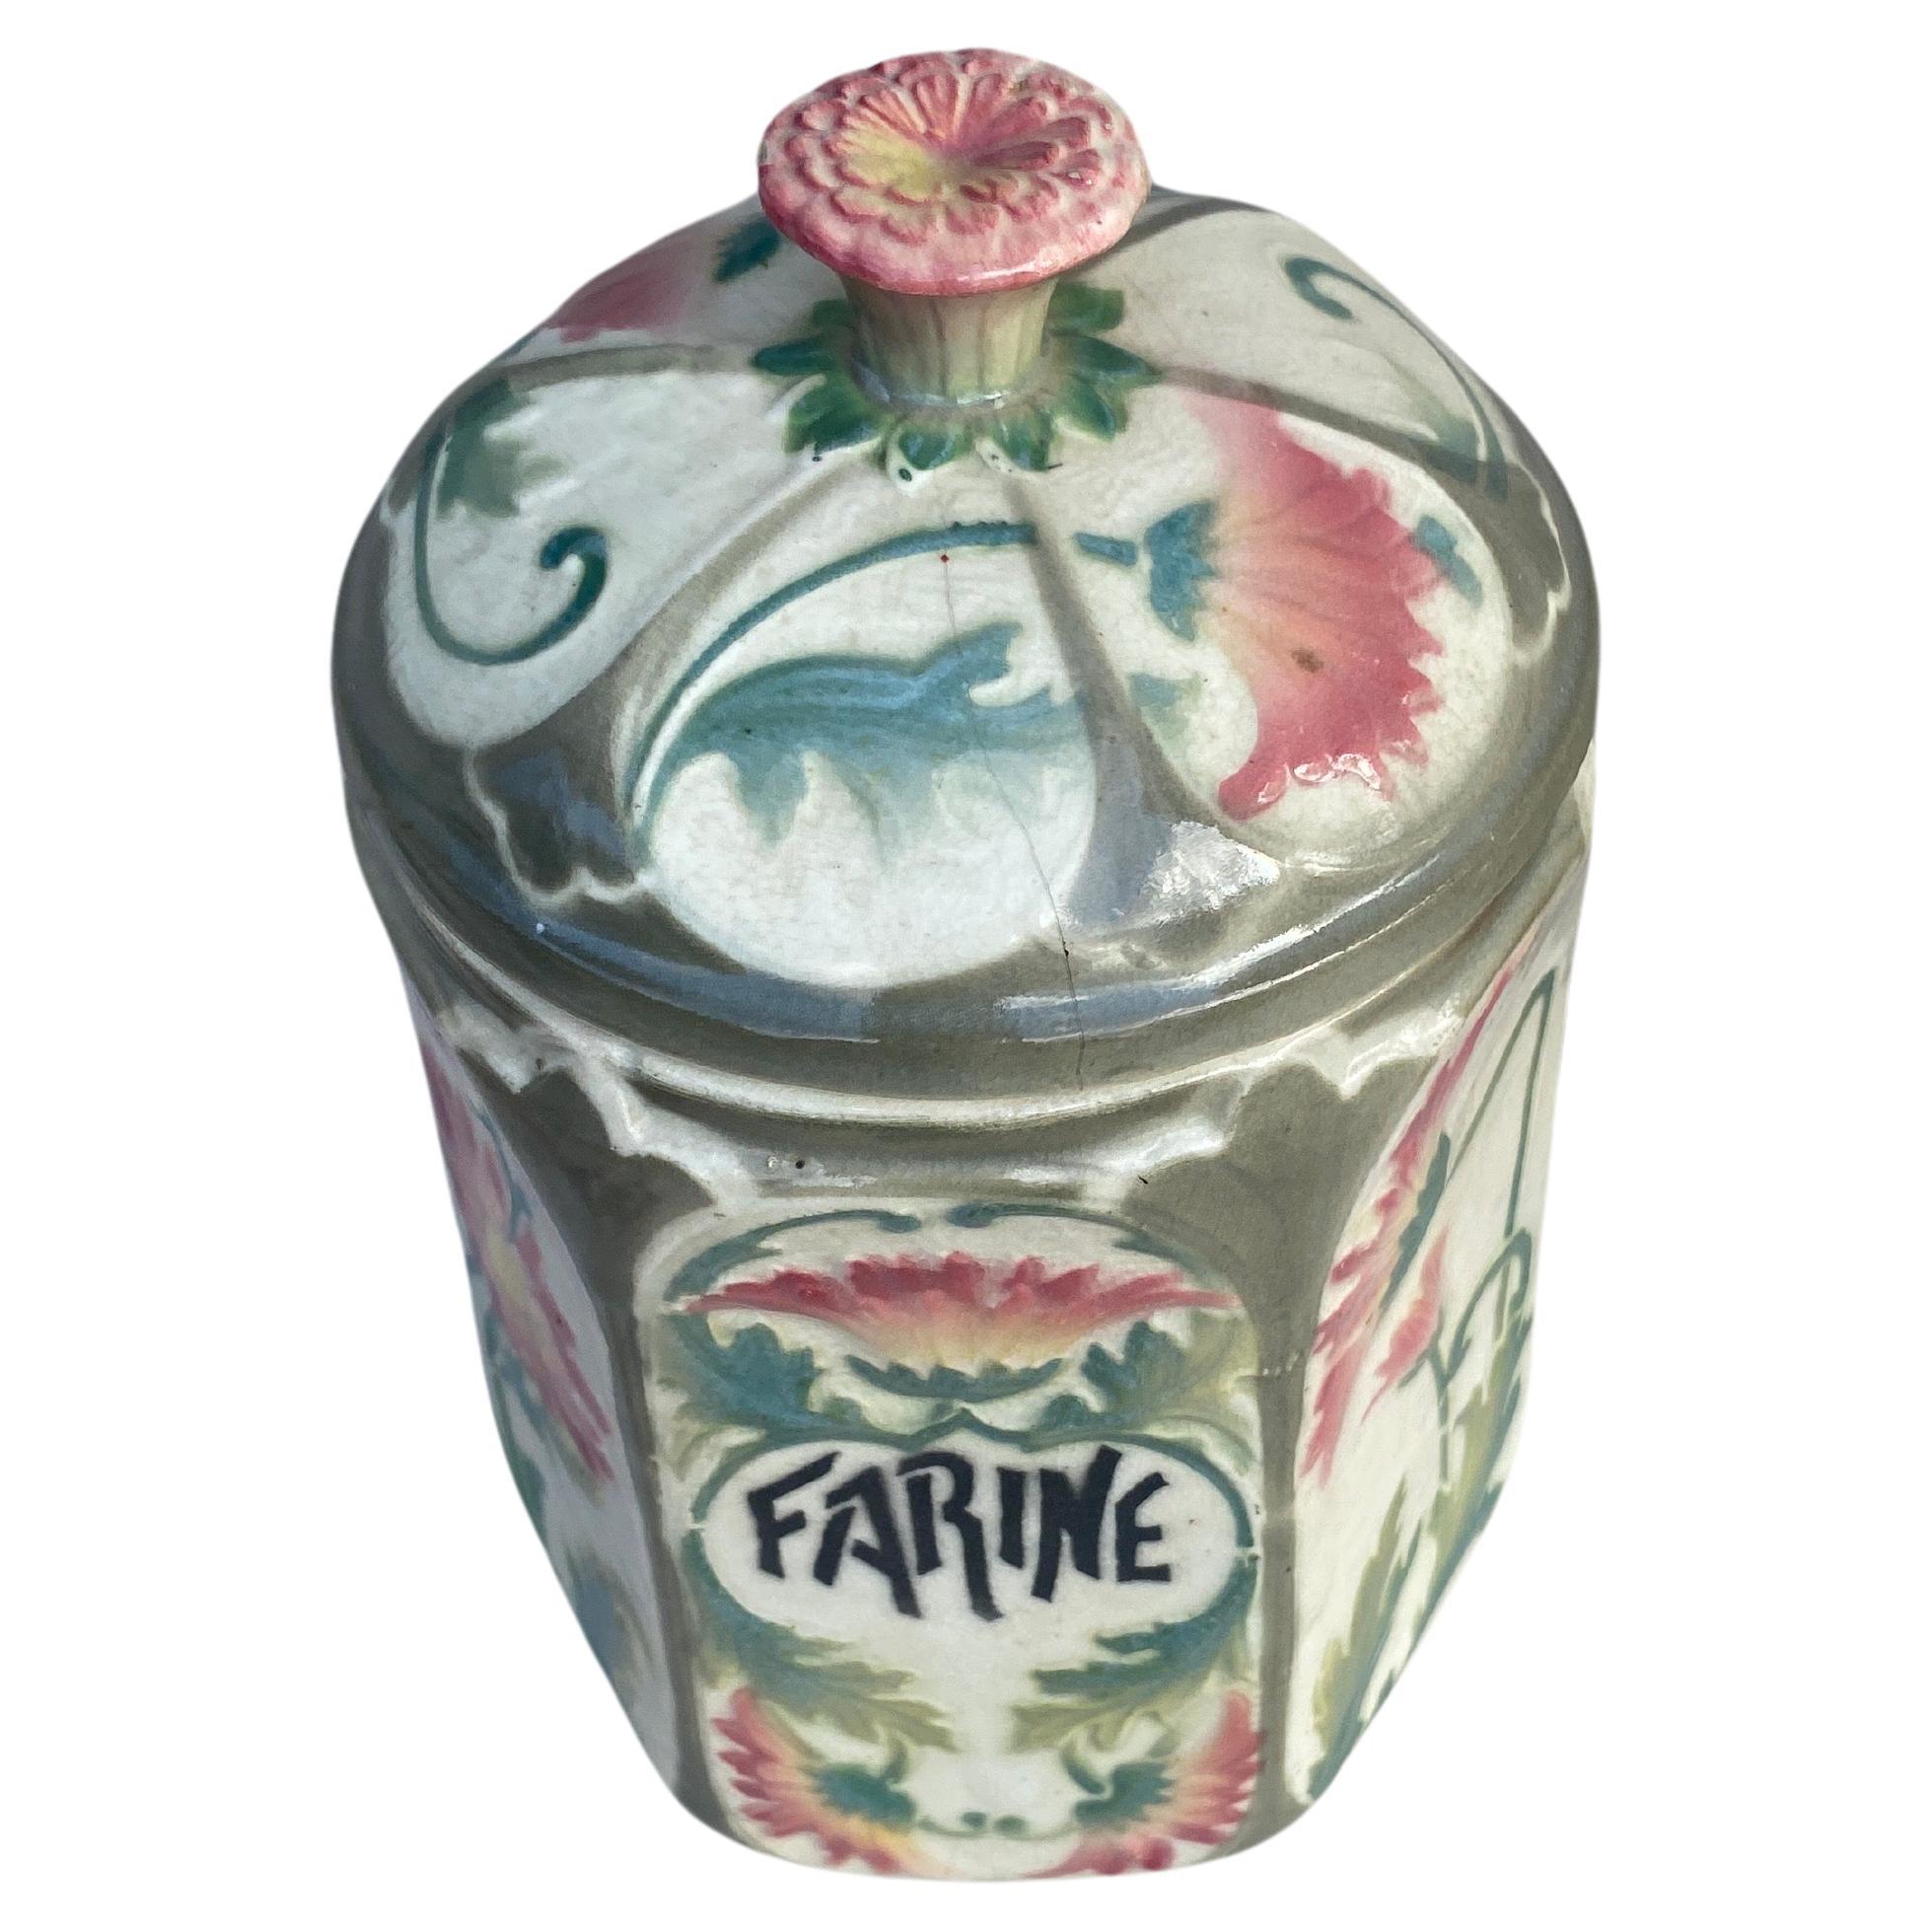 French Majolica Daisies Kitchen flour Canister signed Saint Clement Keller & Guerin Circa 1900.
H / 7.5 inches.
Flour / farine in French.